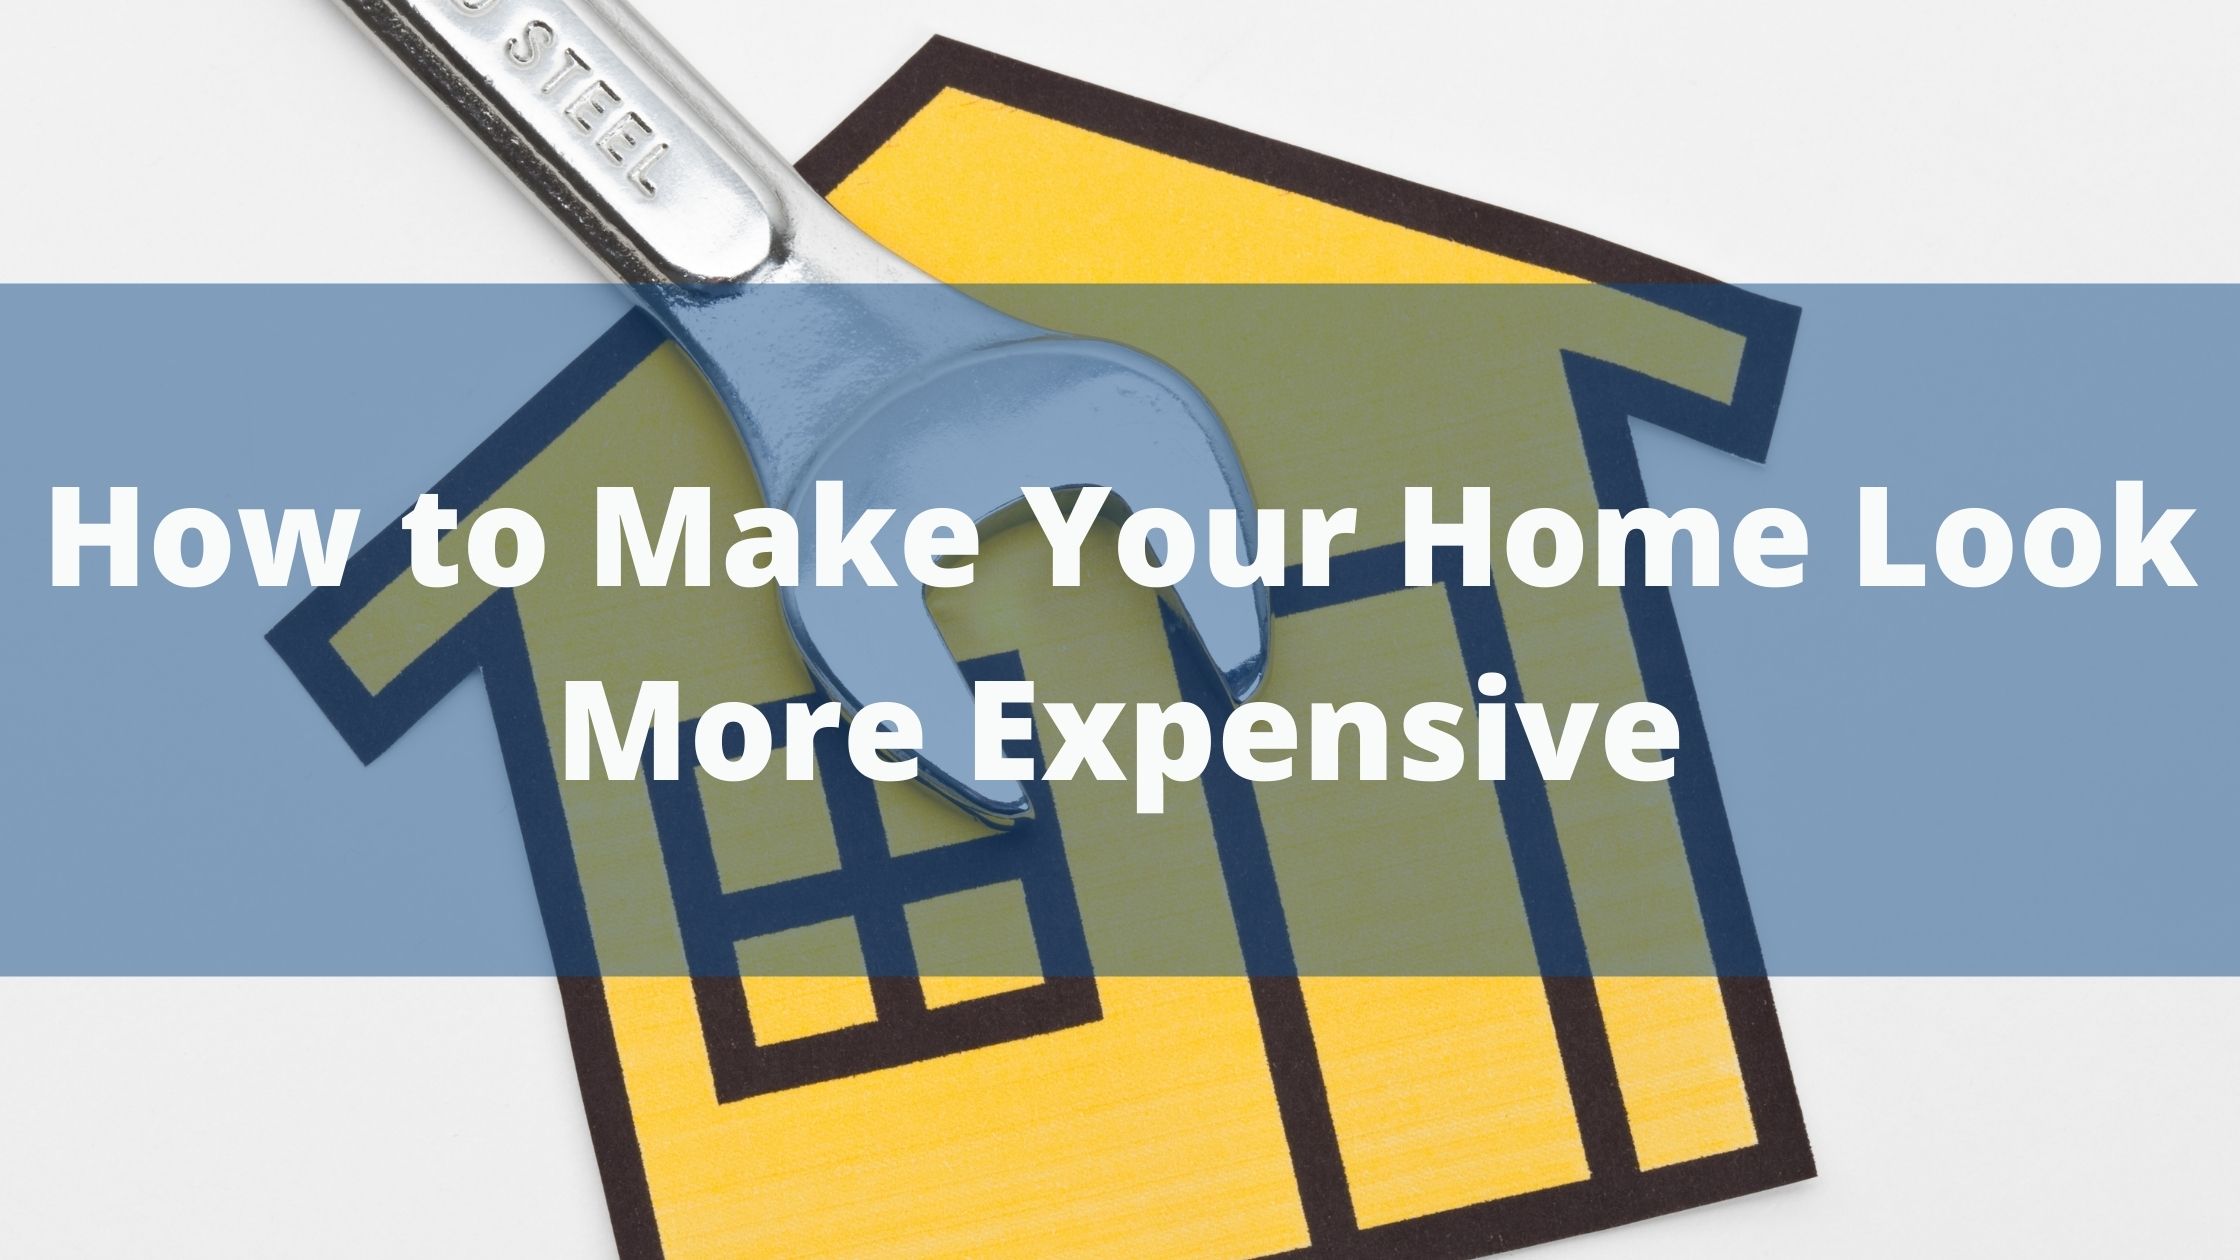 https://handymanconnection.com/wp-content/uploads/2021/09/How-to-Make-Your-Home-Look-More-Expensive.jpg